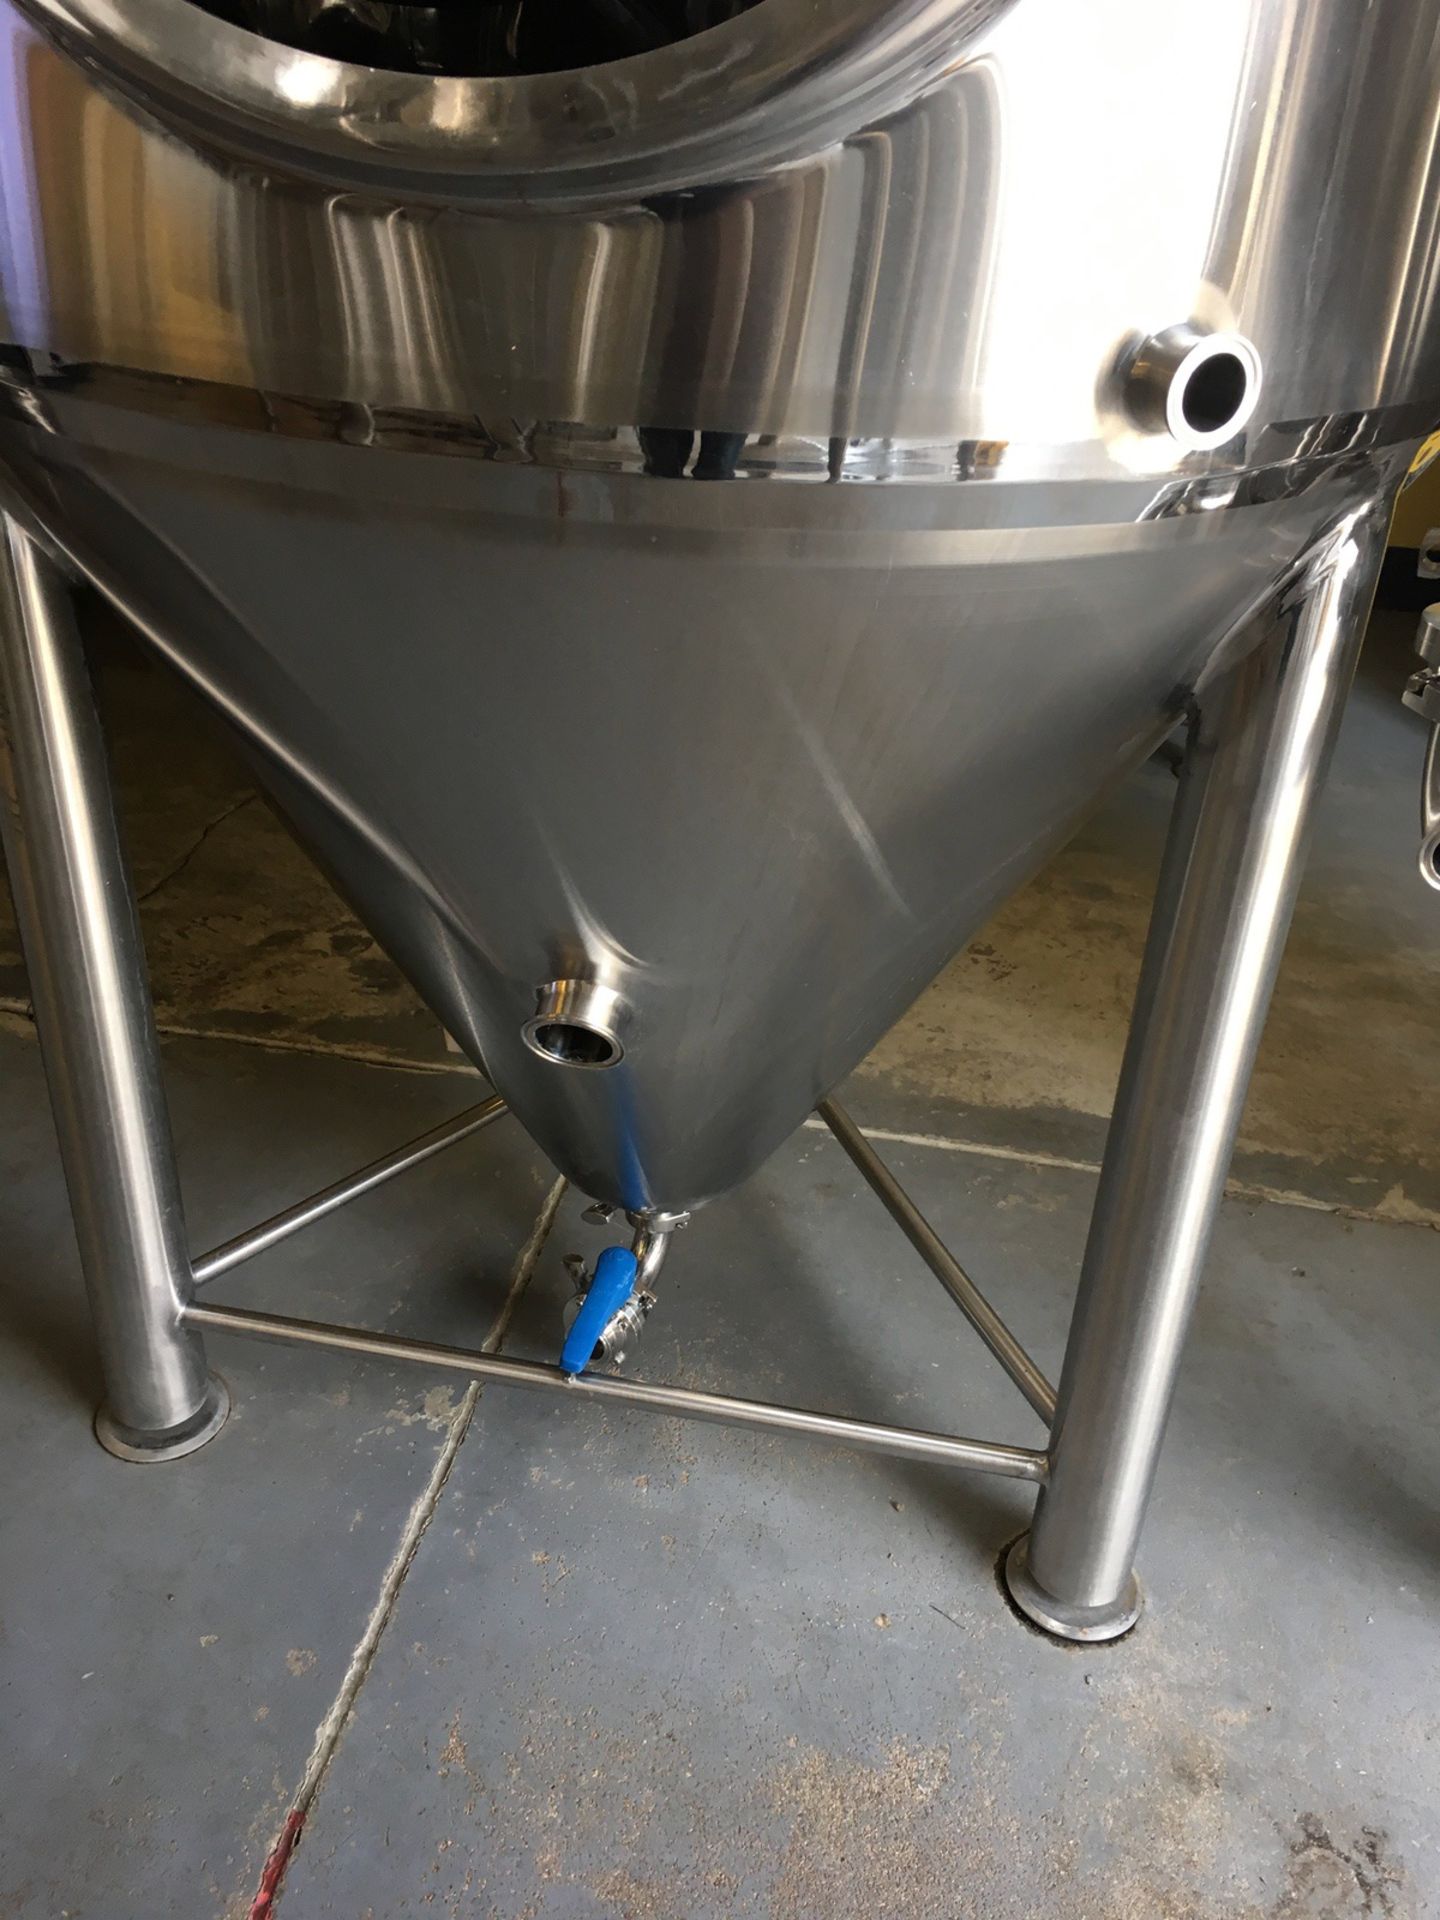 2015 Stout 7 BBL Fermentation Vessel, Stainless Steel, Glycol Ja | Subject to Bulk | Rig Fee: $350 - Image 3 of 8